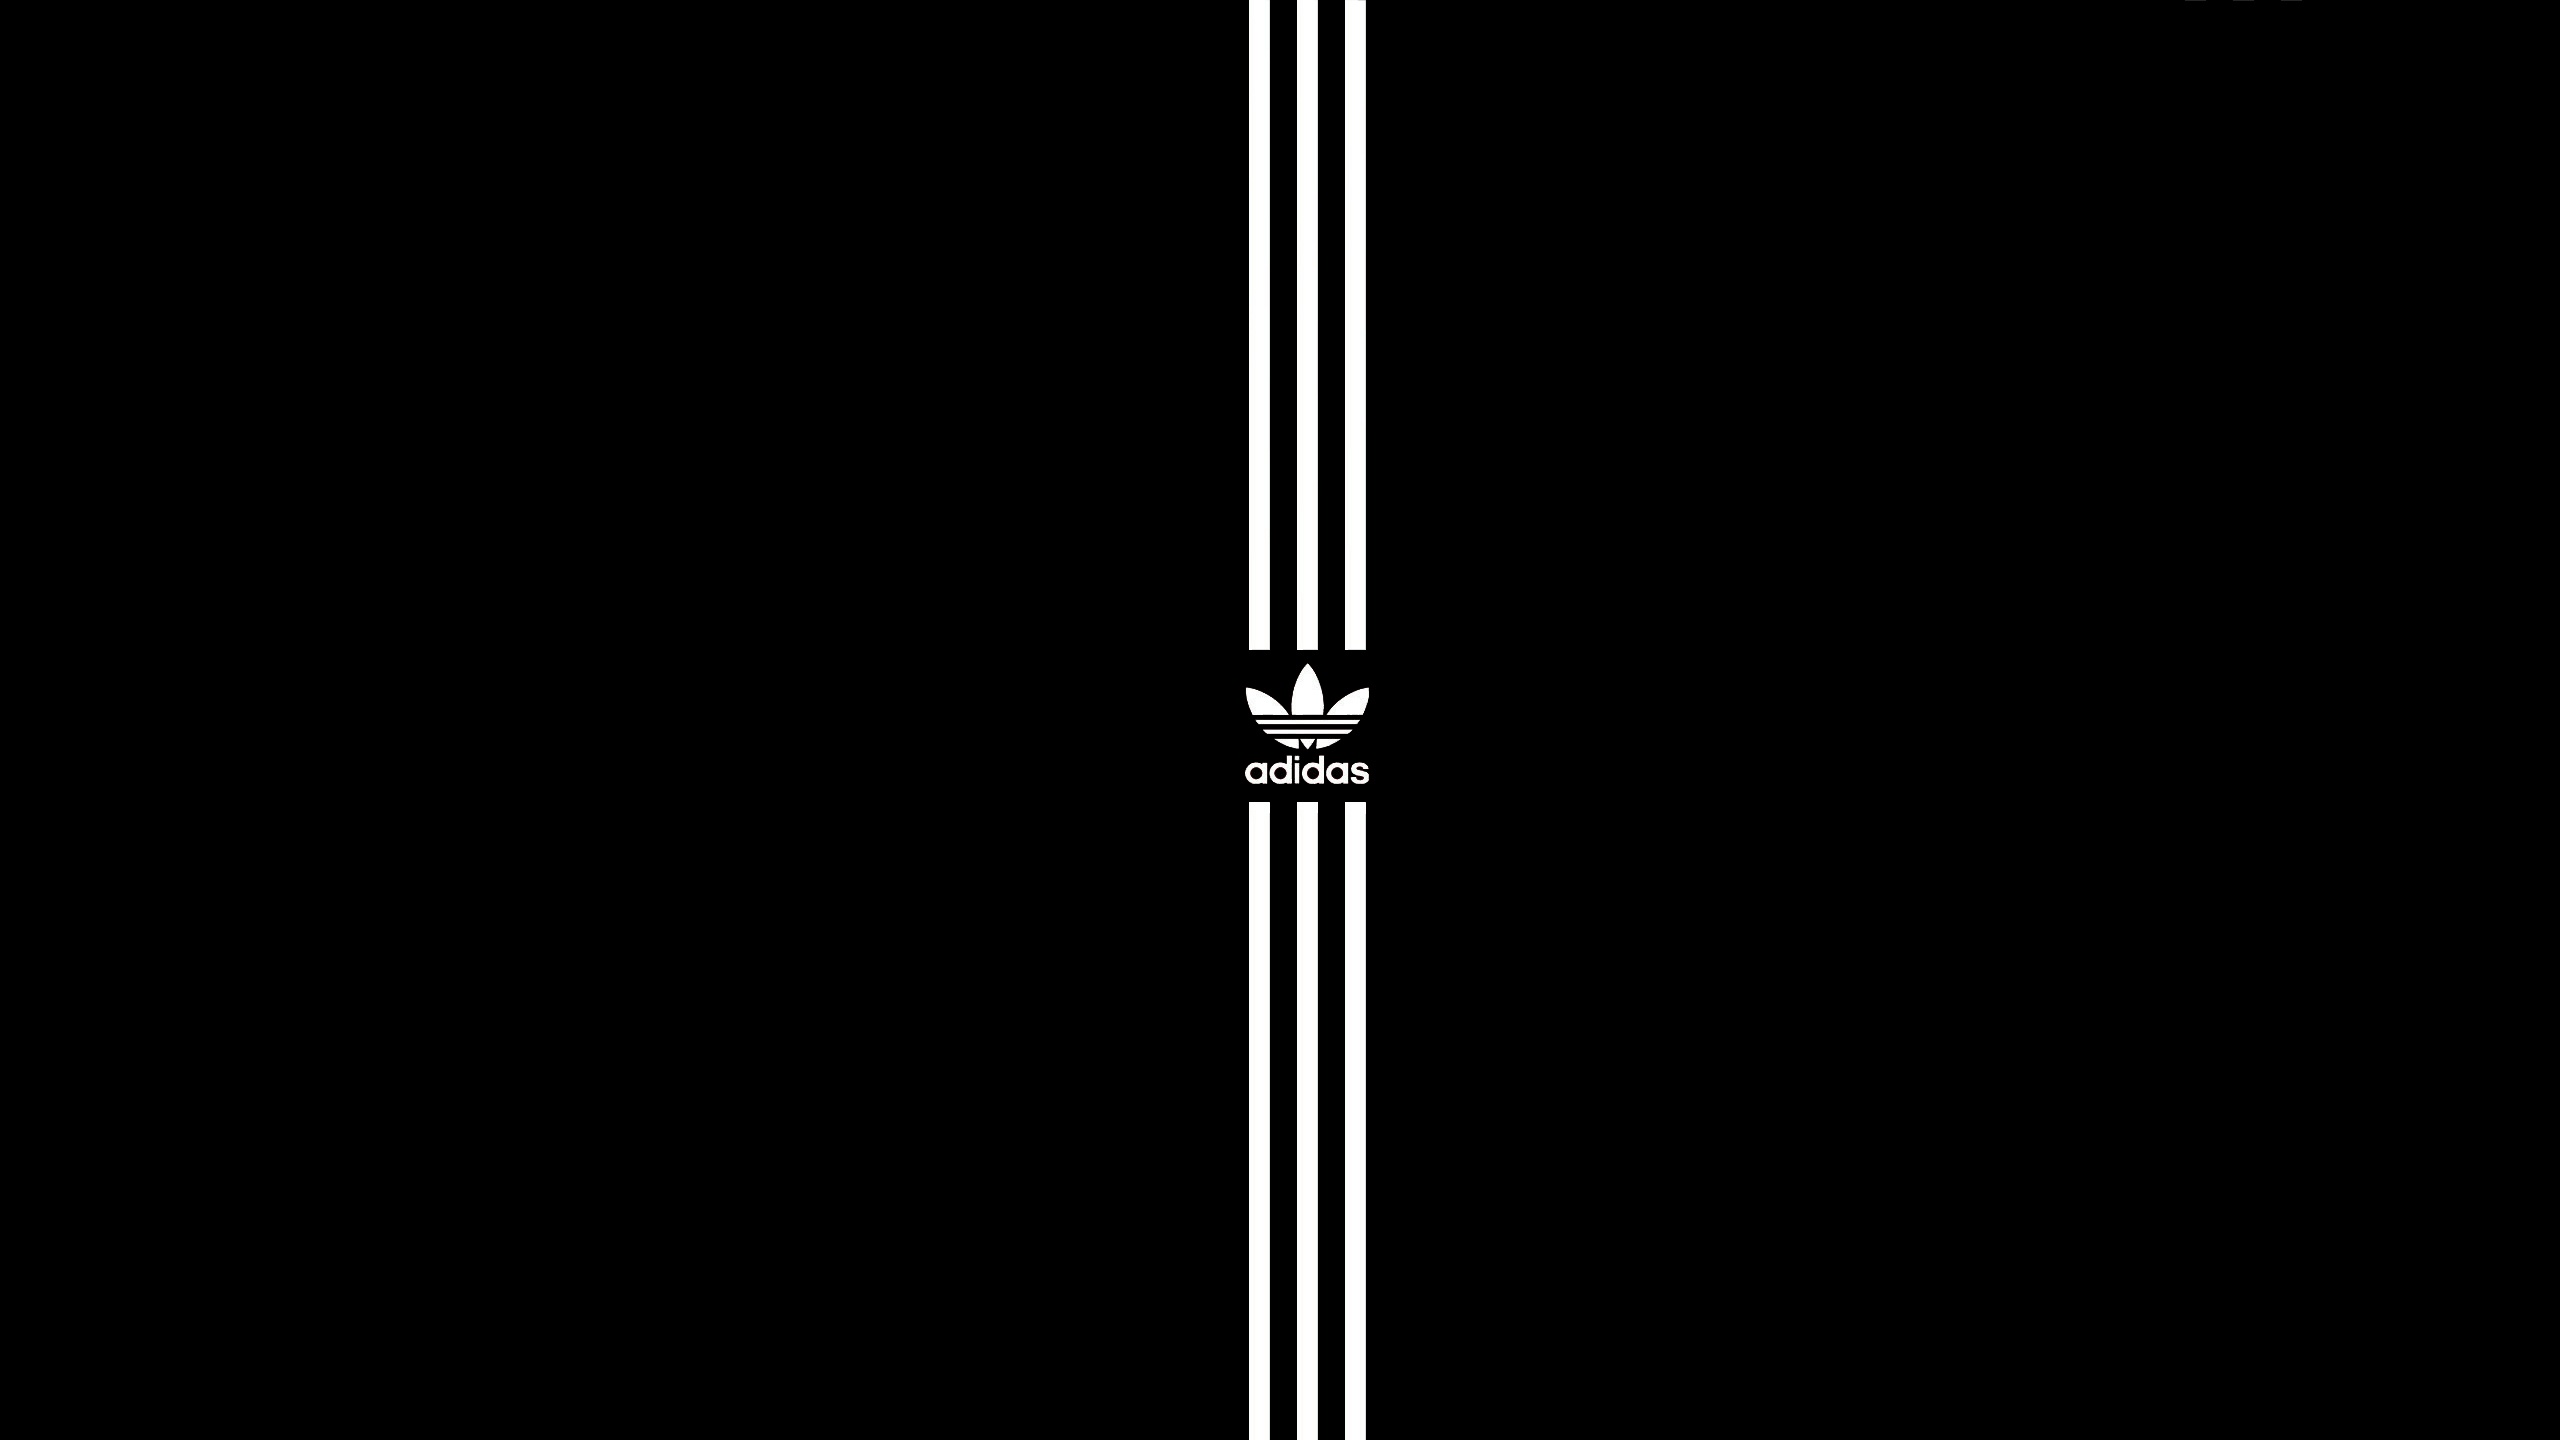 Adidas wallpapers hd background images photos pictures â yl computing